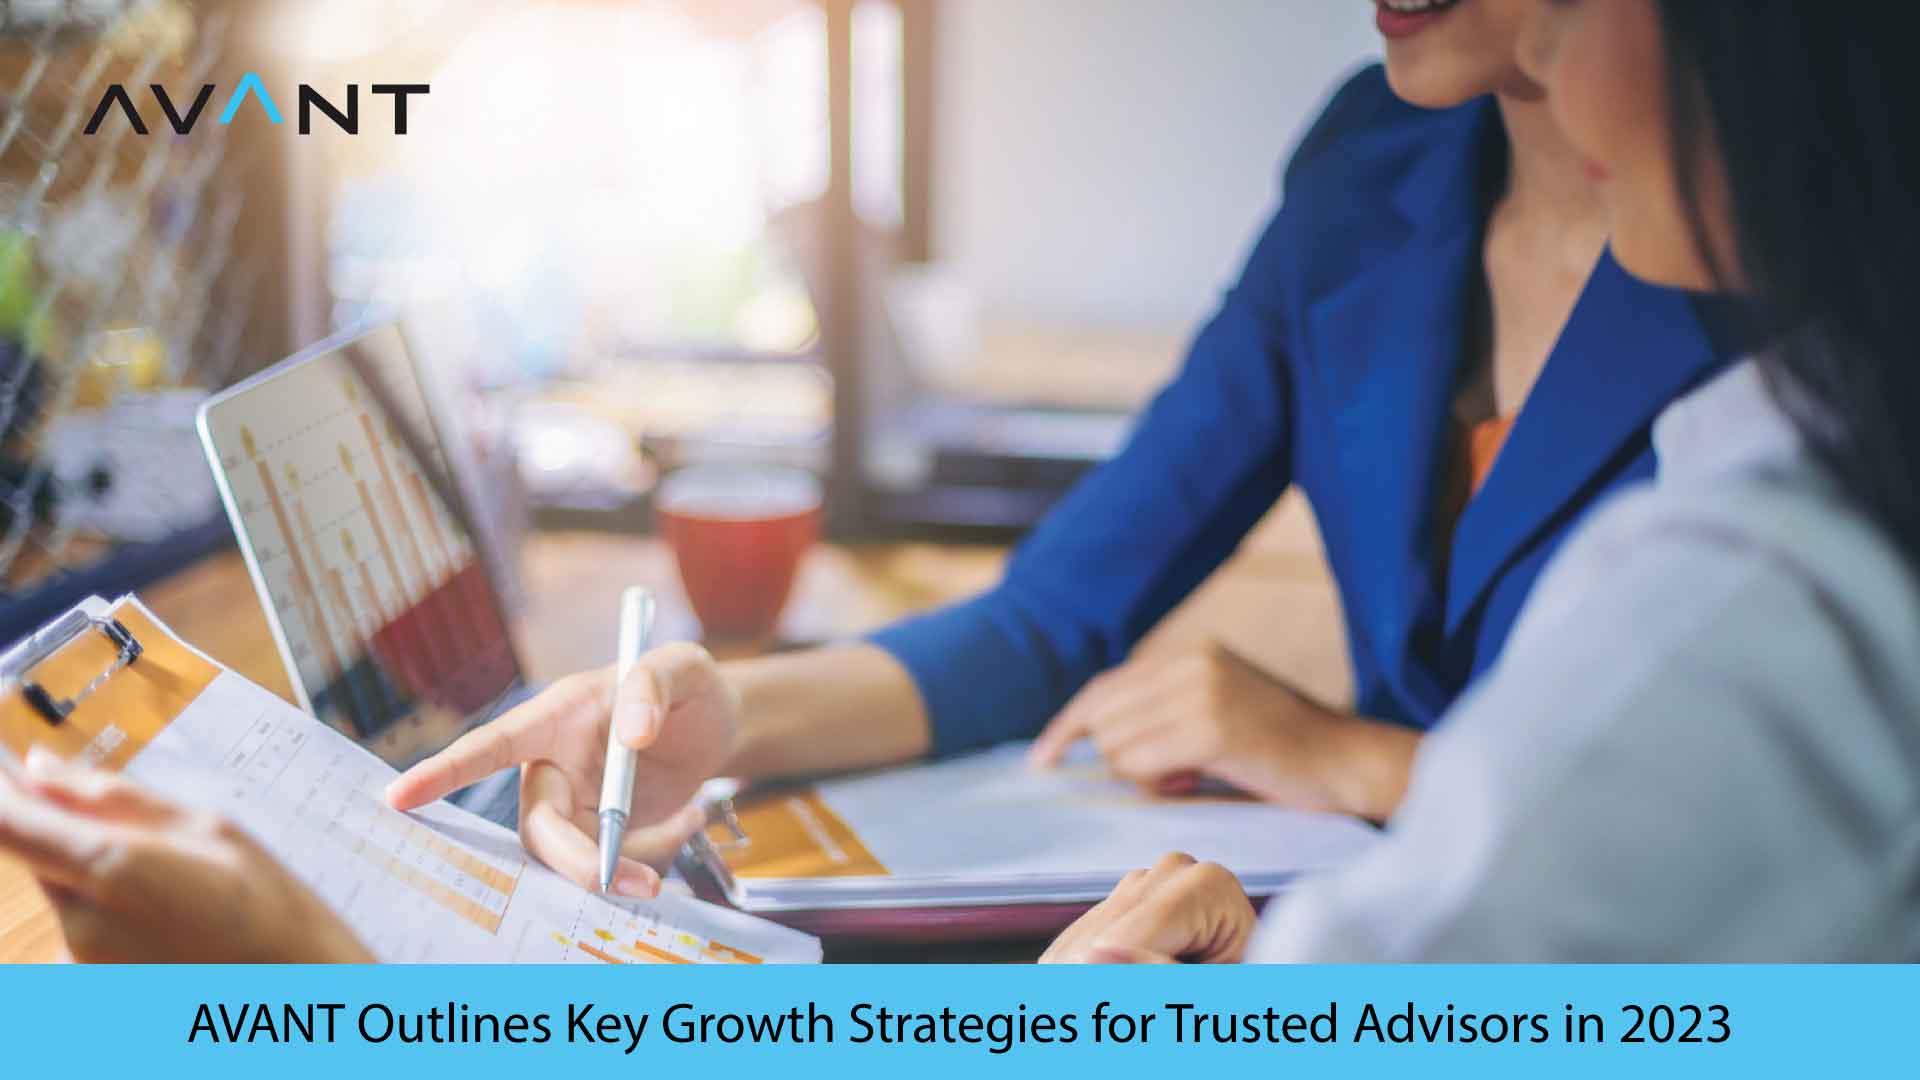 AVANT Outlines Key Growth Strategies for Trusted Advisors in 2023